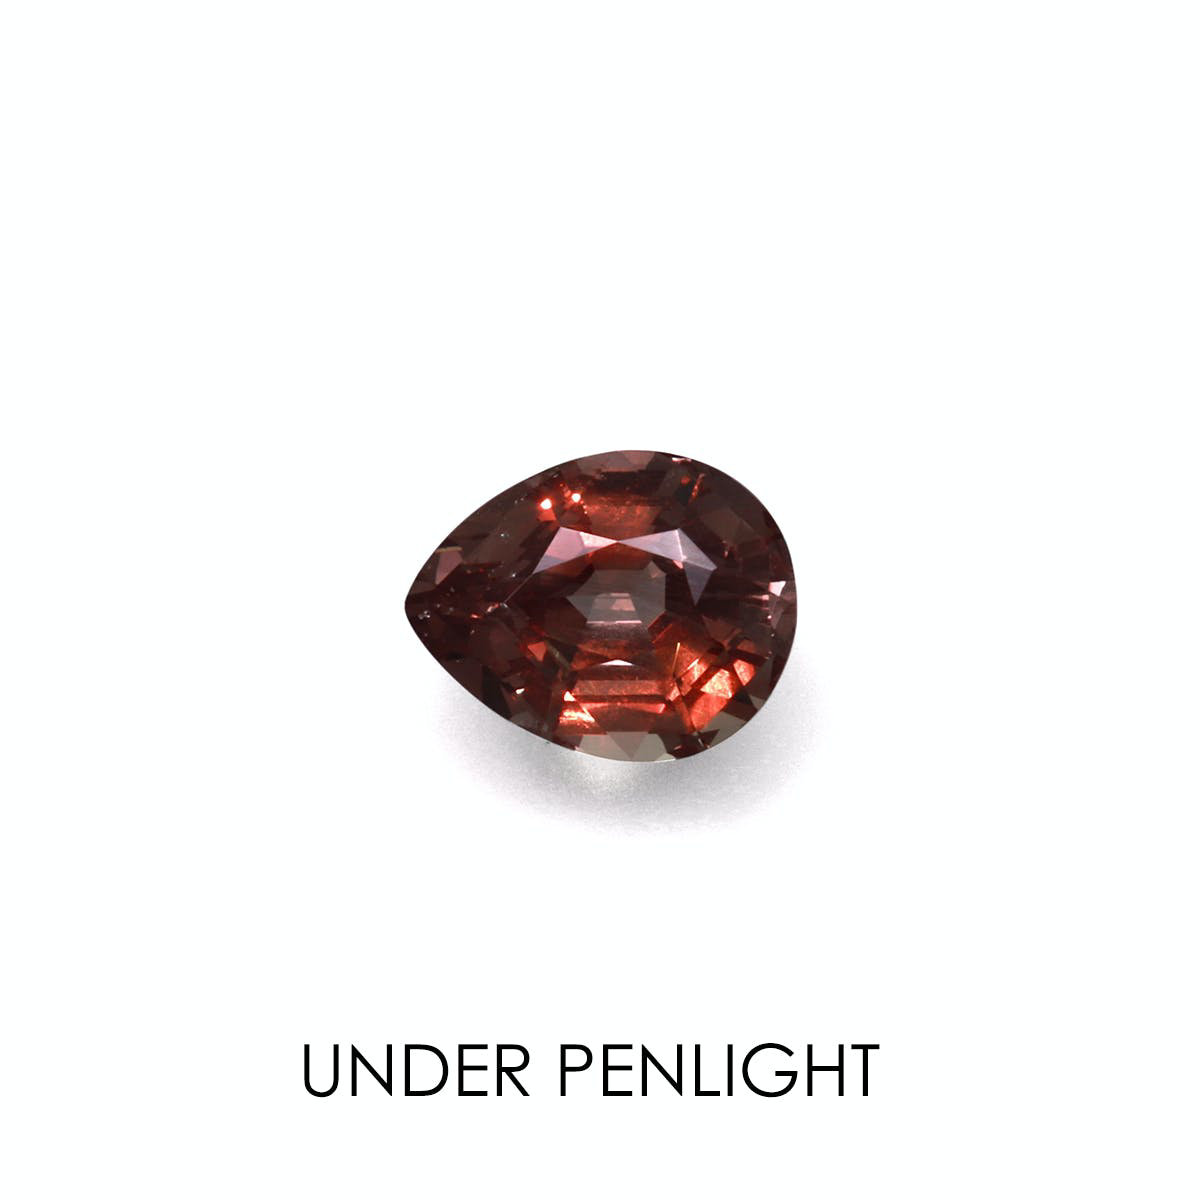 Picture of Brown Colour Change Garnet 3.35ct - 10x8mm (CG0045)